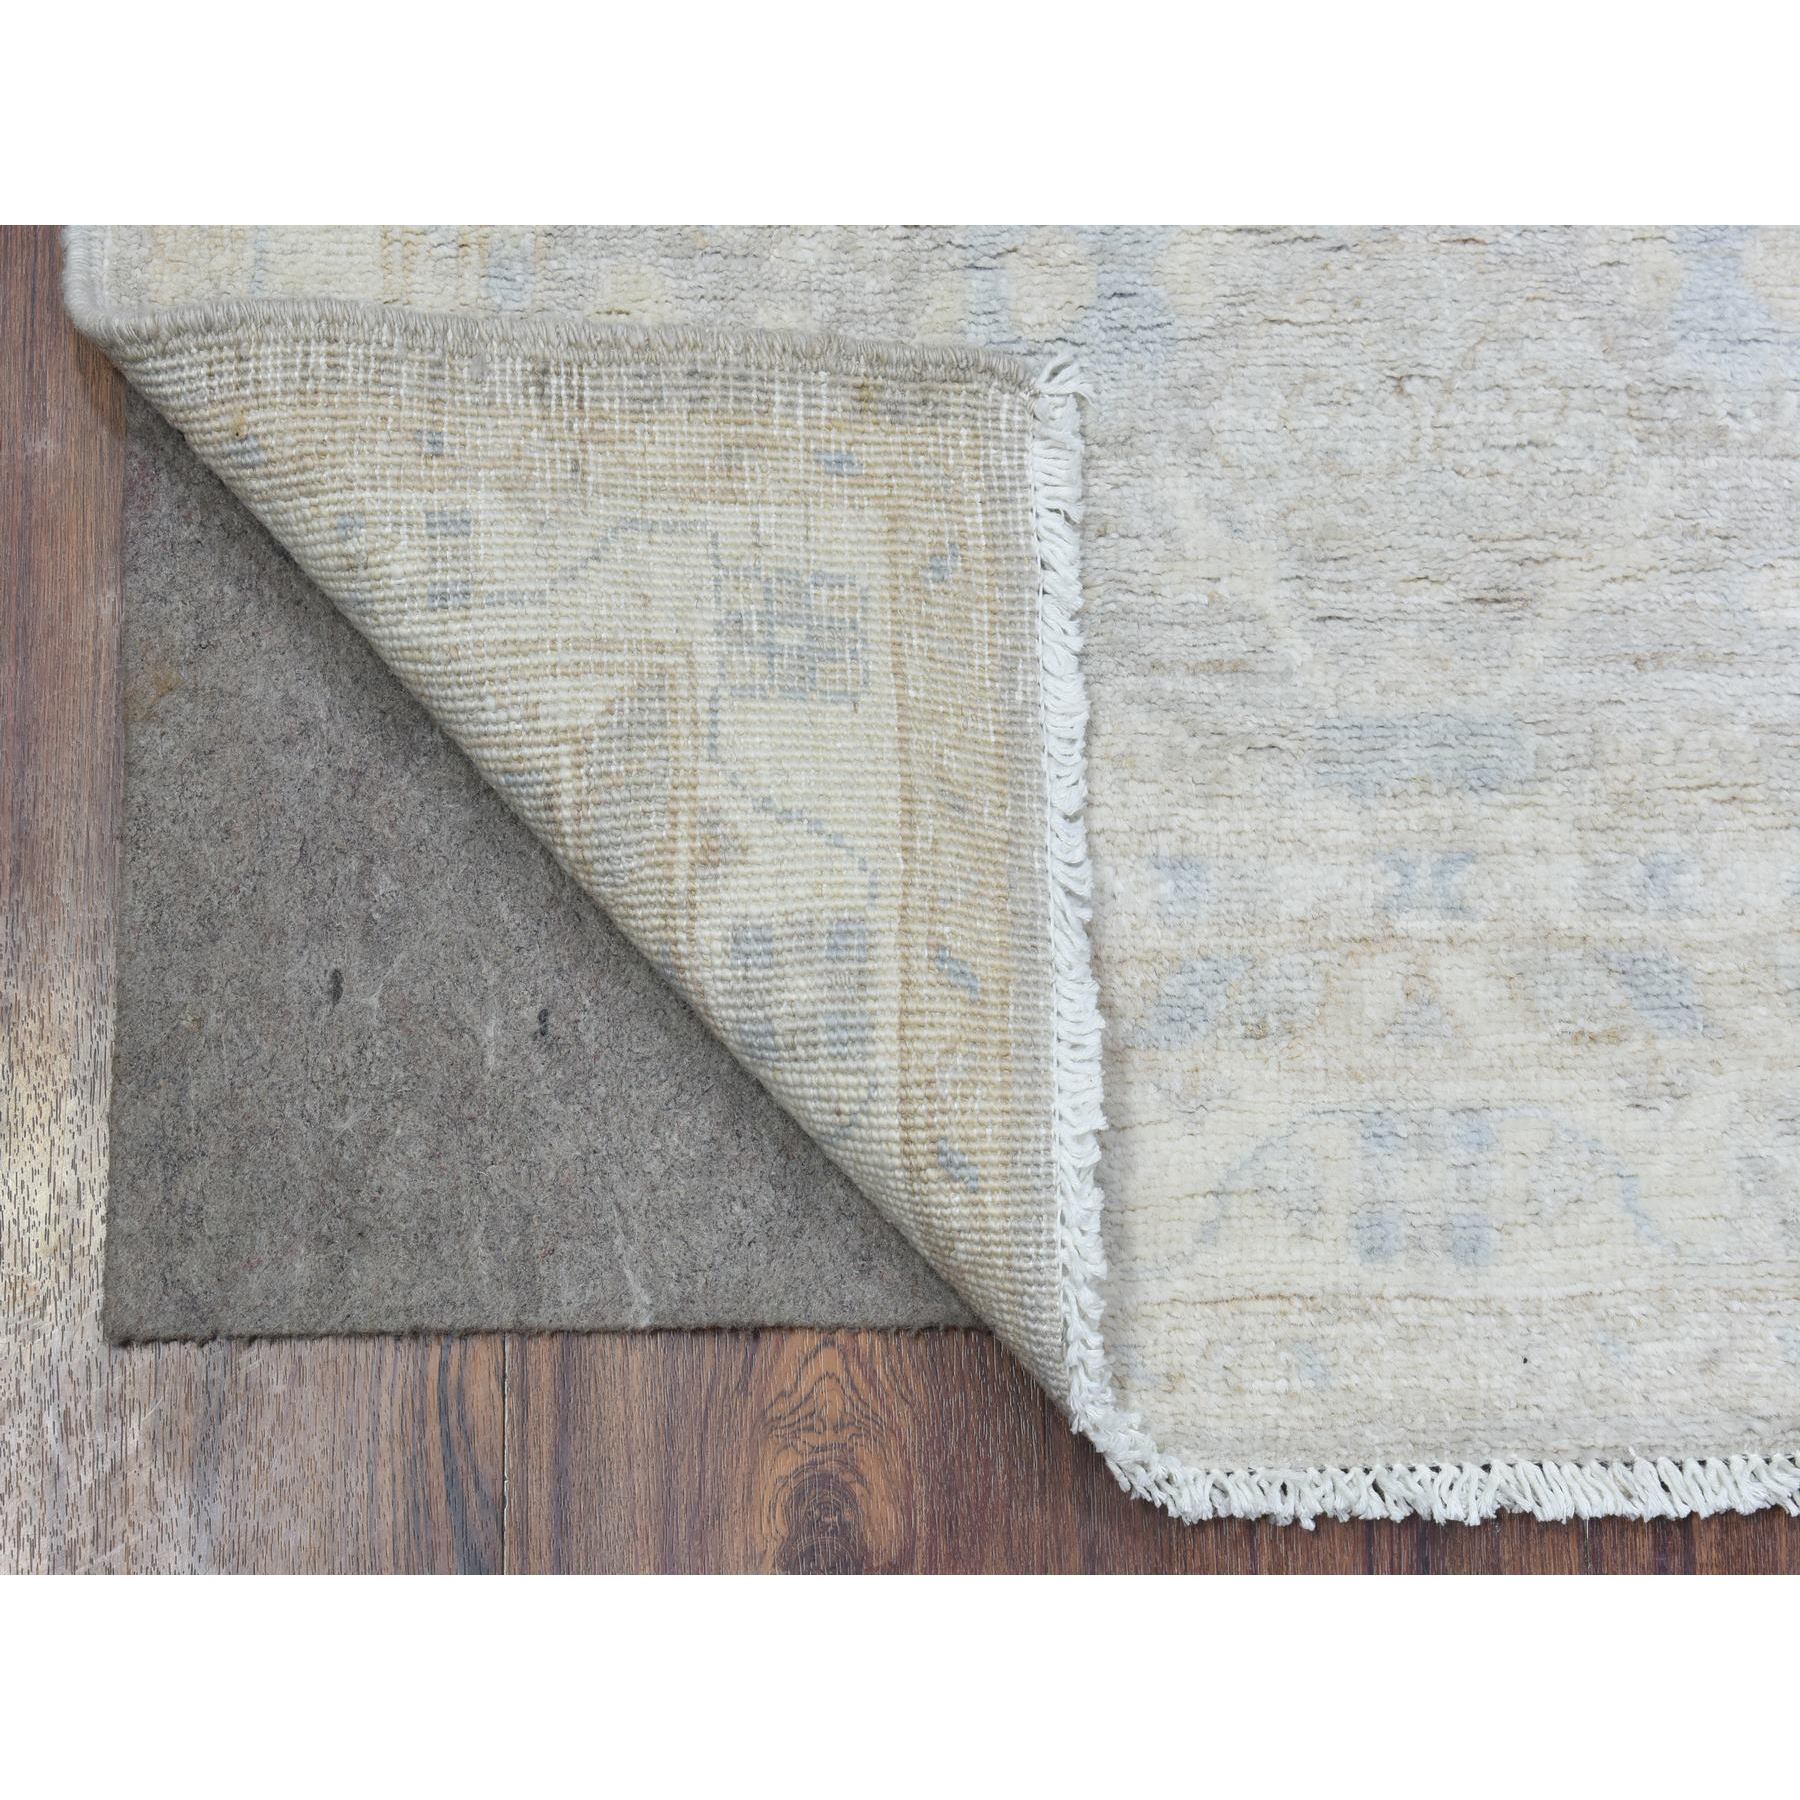 2'6"x7'9" Light Gray, Hand Woven White Wash Peshawar with All Over Design, Natural Dyes Soft Organic Wool, Runner Oriental Rug 